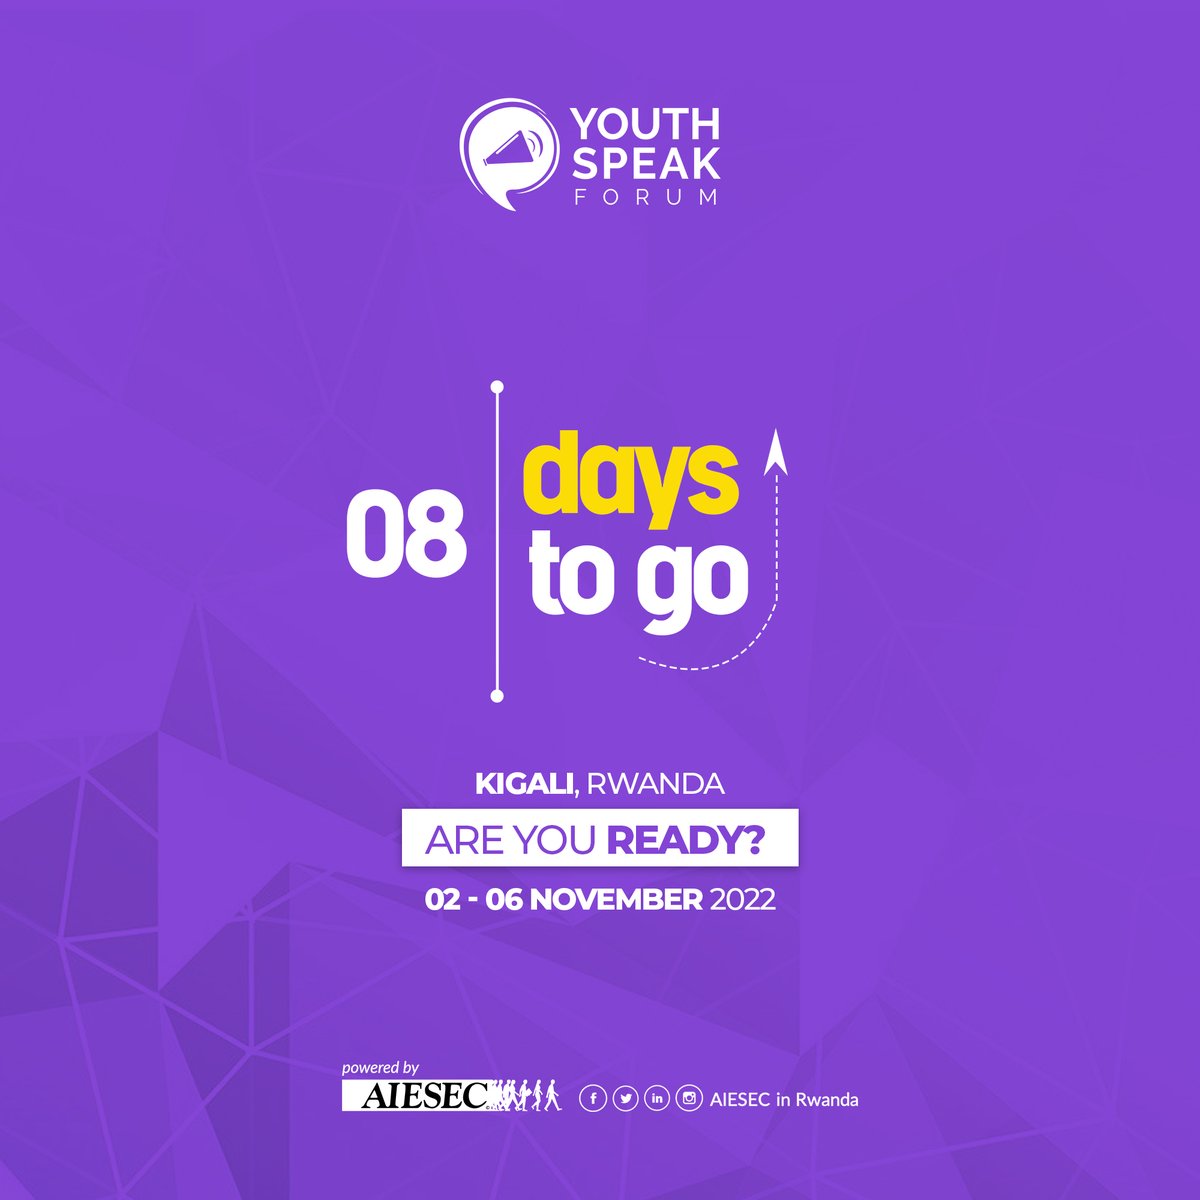 @AIESECRWANDA  will host in a few days in Kigali, the Youth speak forum Africa 2022 which will gather more than 500 participants.

#YSF2022 #ShapeTheFuture #YouthSpeakForum   #AIESECinRwanda